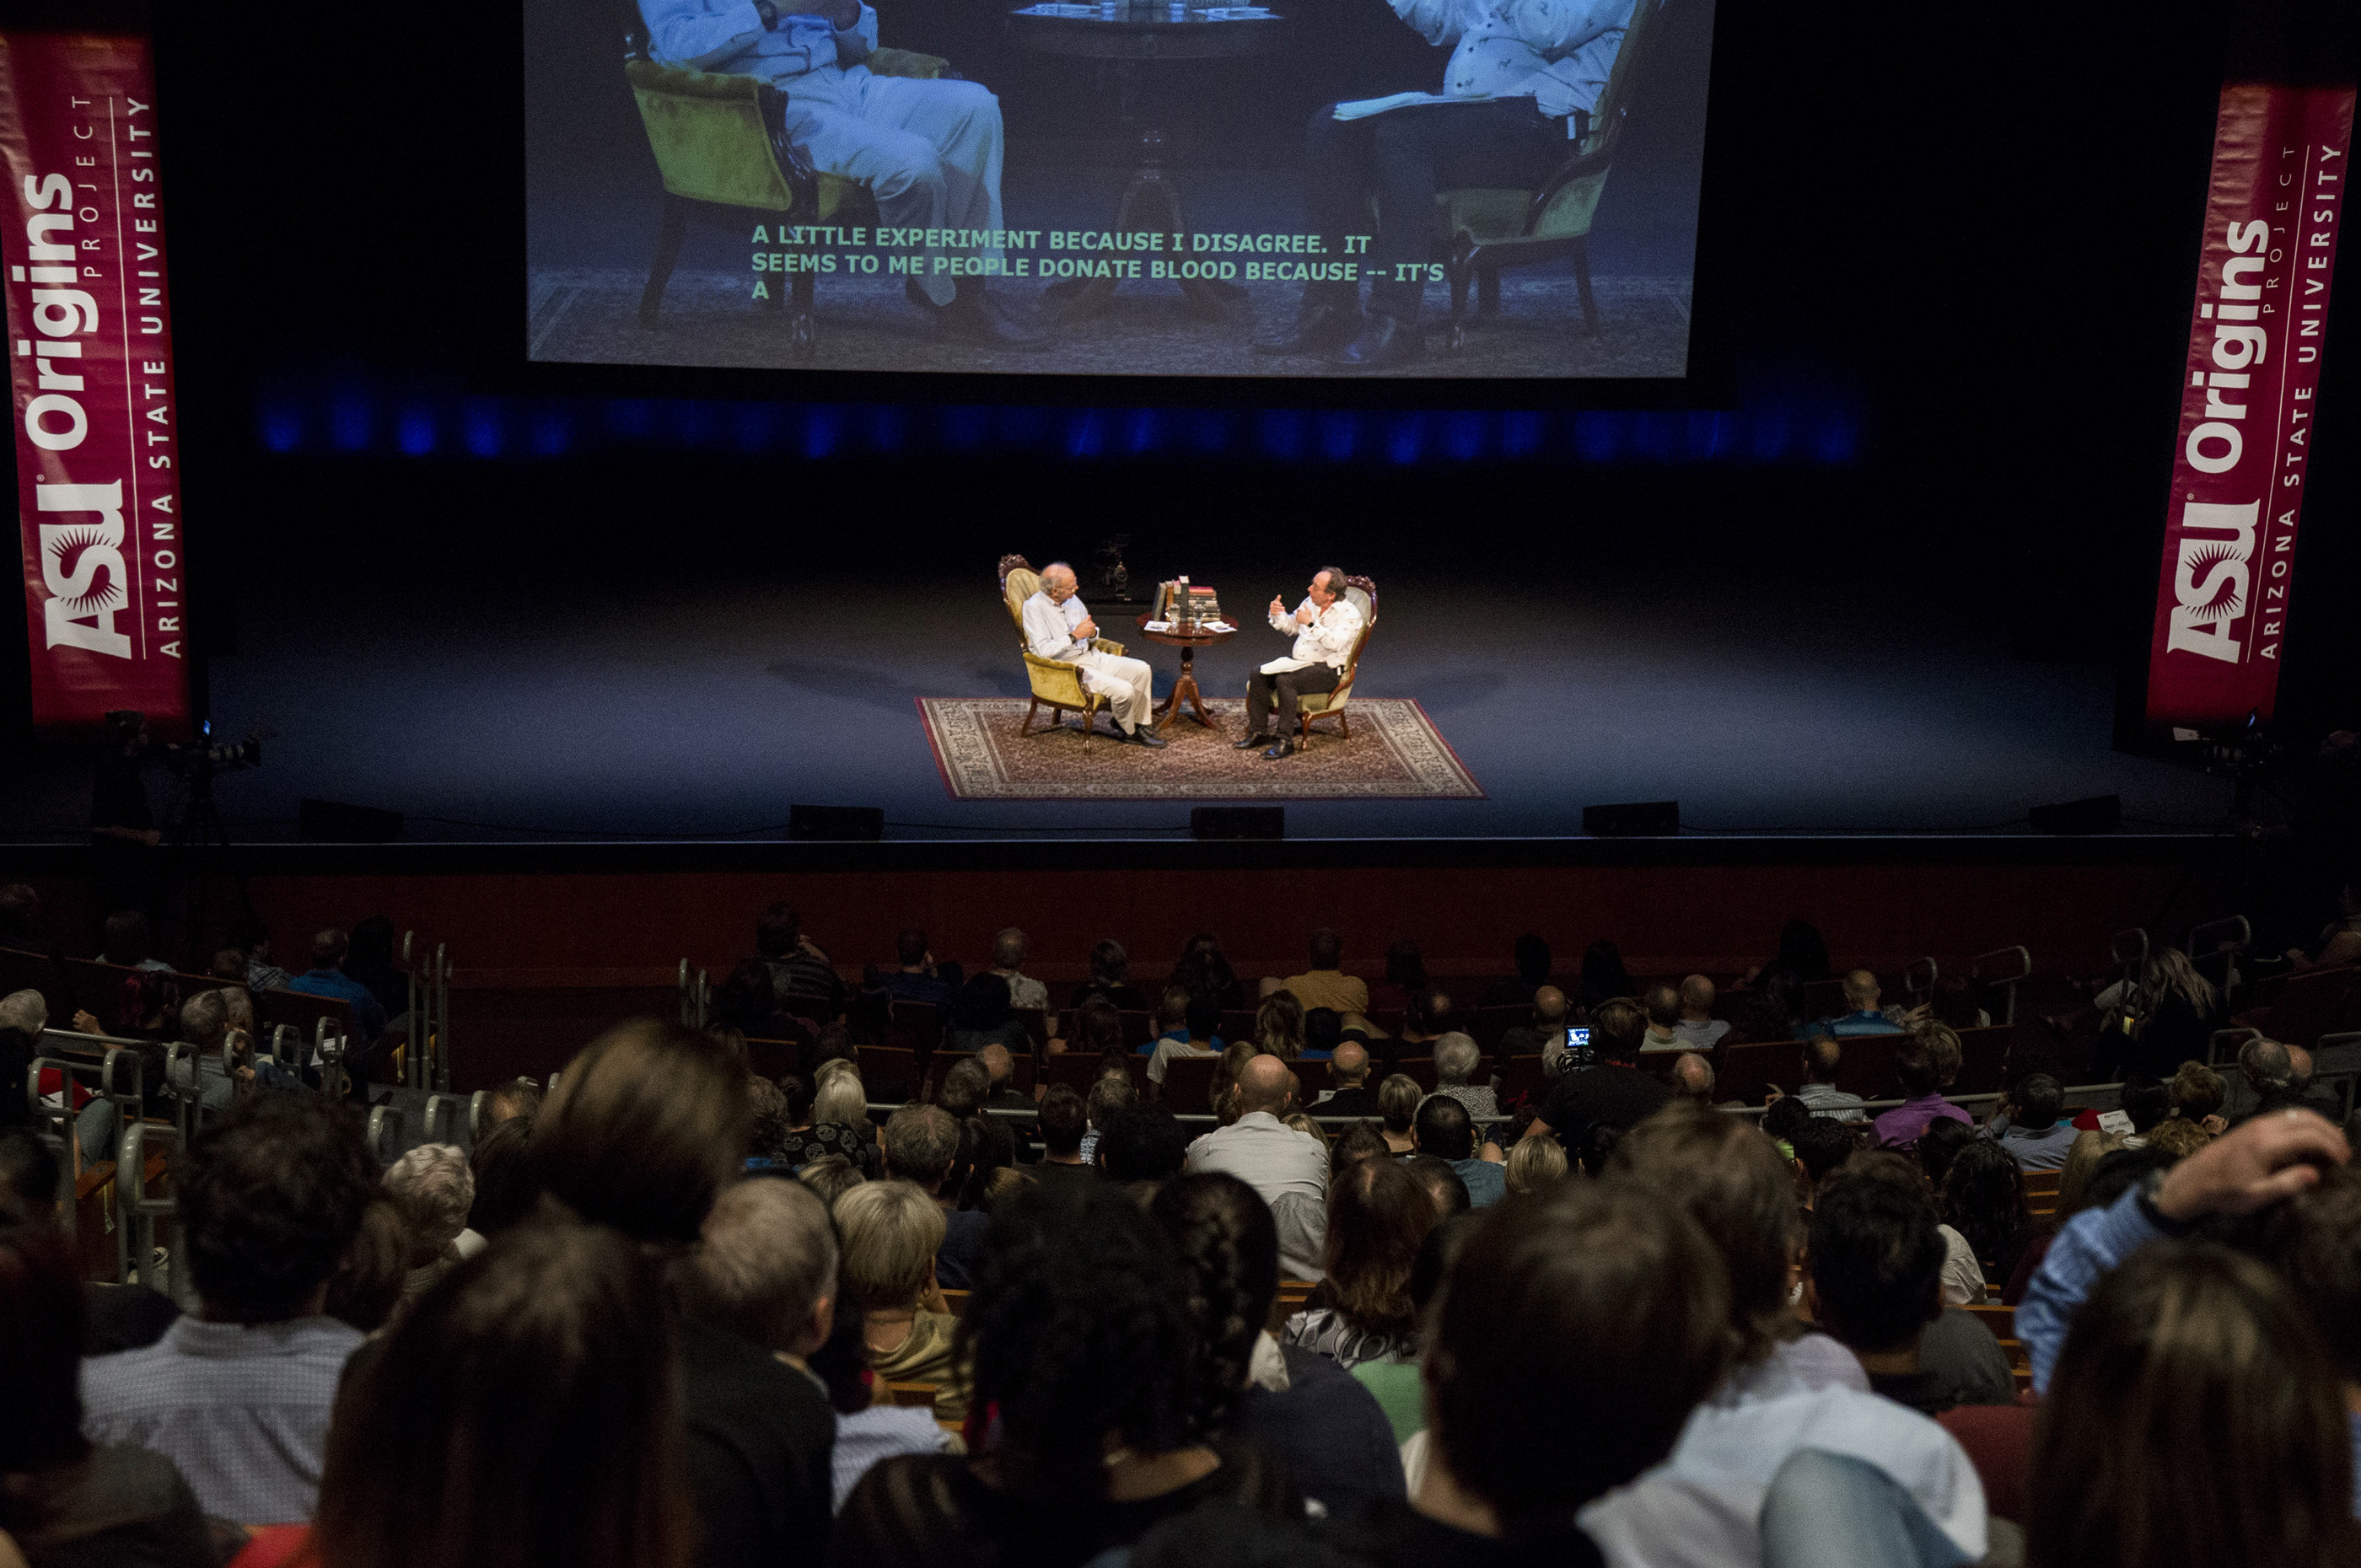 Animal-rights philosopher Peter Singer and theoretical physicist Lawrence Krauss on stage